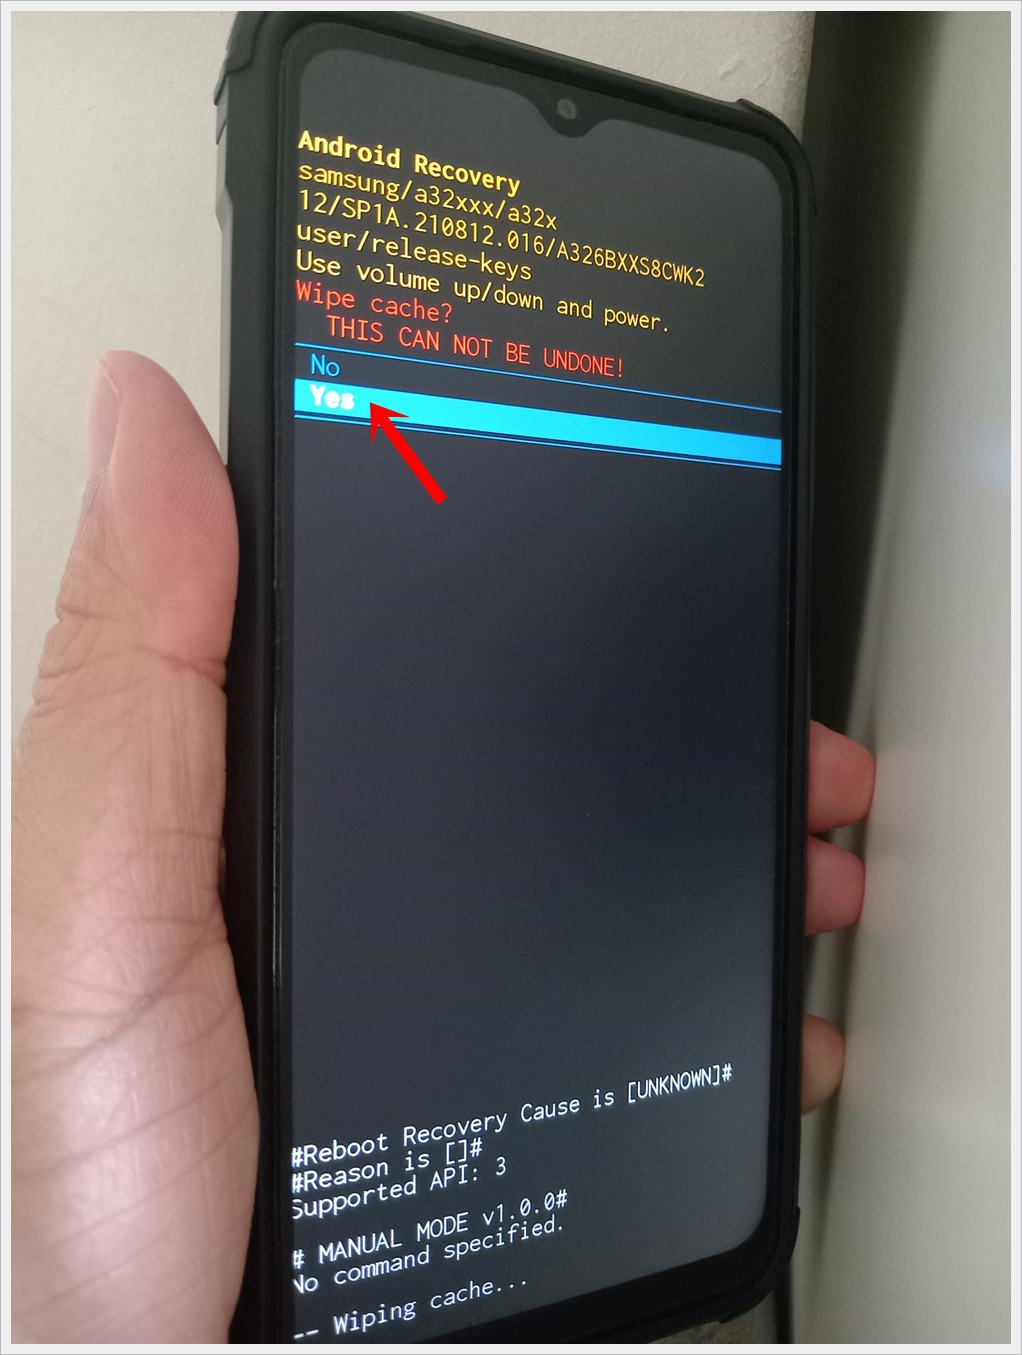 Clear Cache Partition to Fix an Android Phone That Keeps Restarting: This photo shows an Android phone displaying the 'Android Recovery' screen with the 'Yes' option highlighted to confirm wipe cache action.